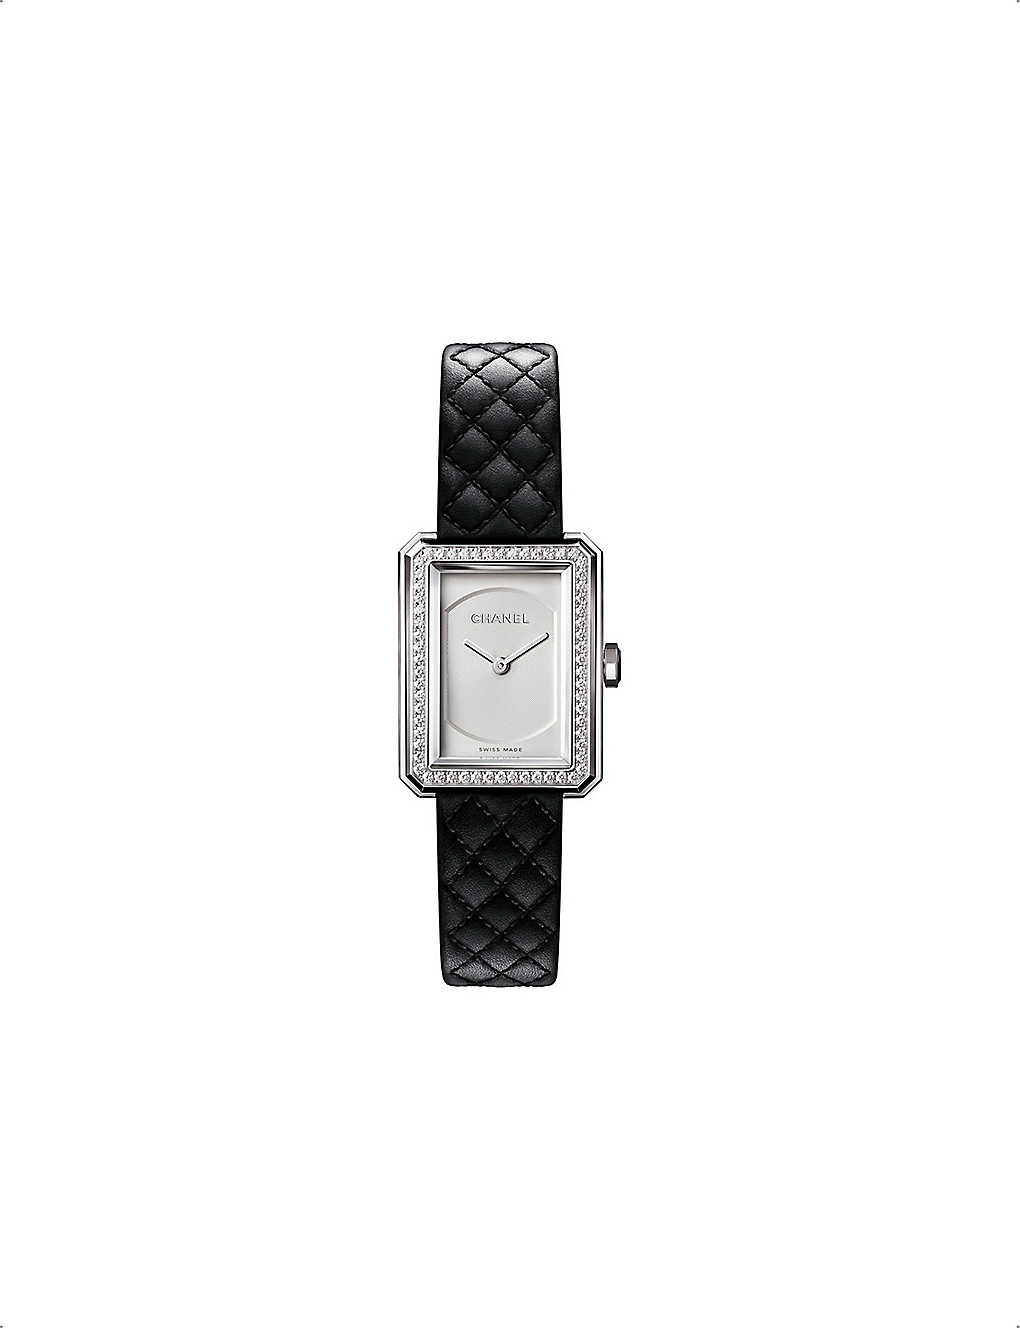 Pre-owned Chanel Women's Black & Silver H6955 Boy·friend 0.37ct Diamond, Leather And Steel Quartz Watch